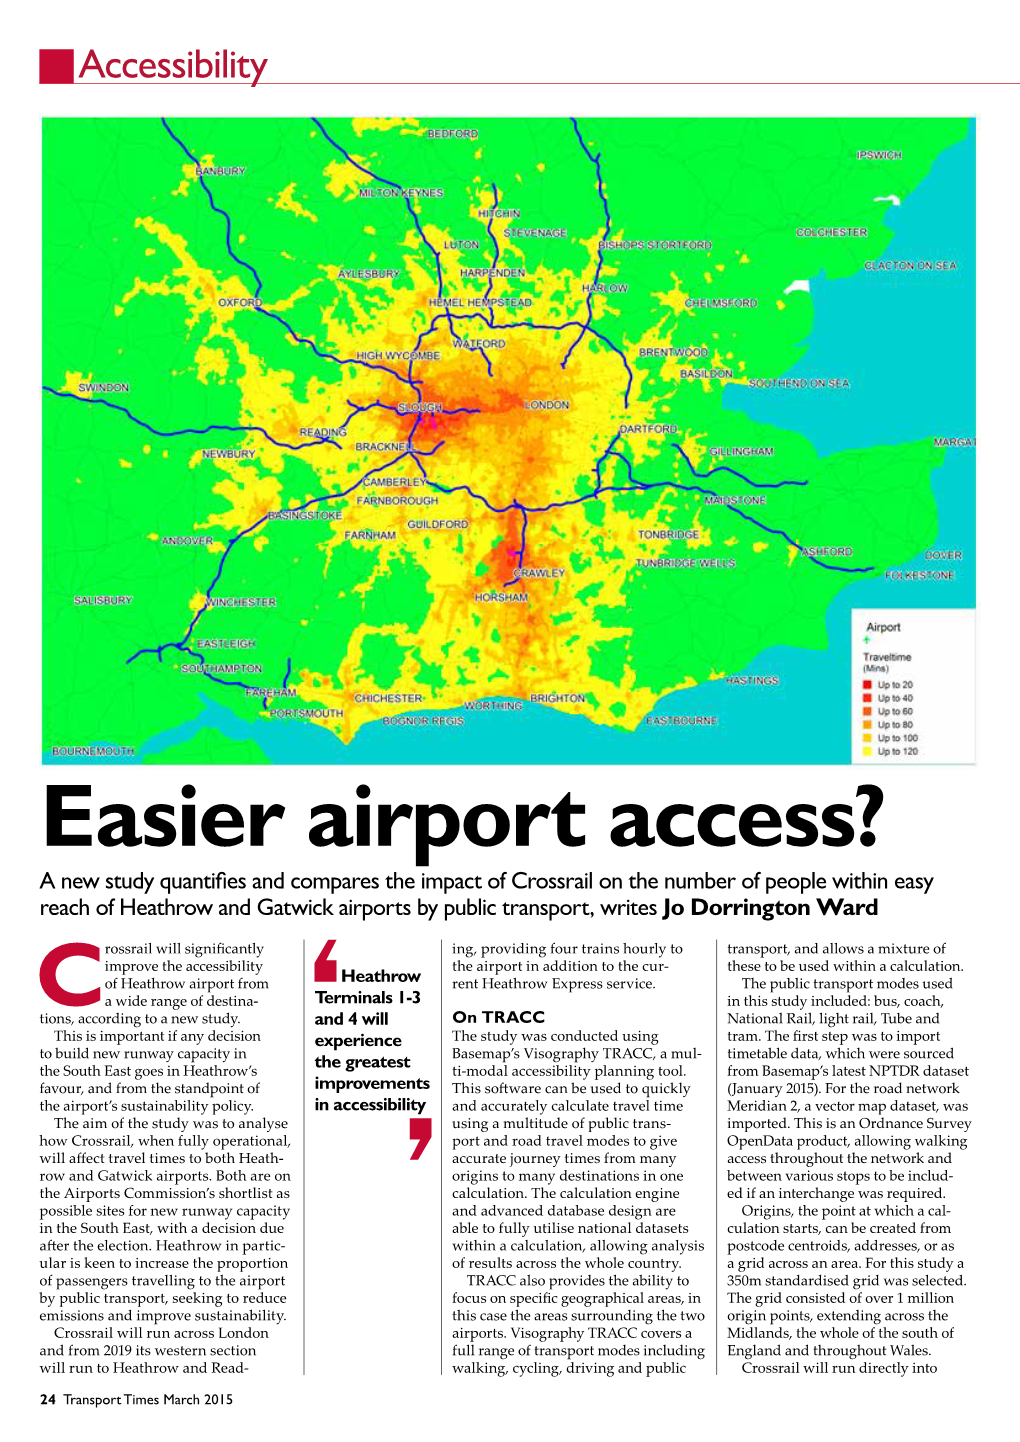 Easier Airport Access?